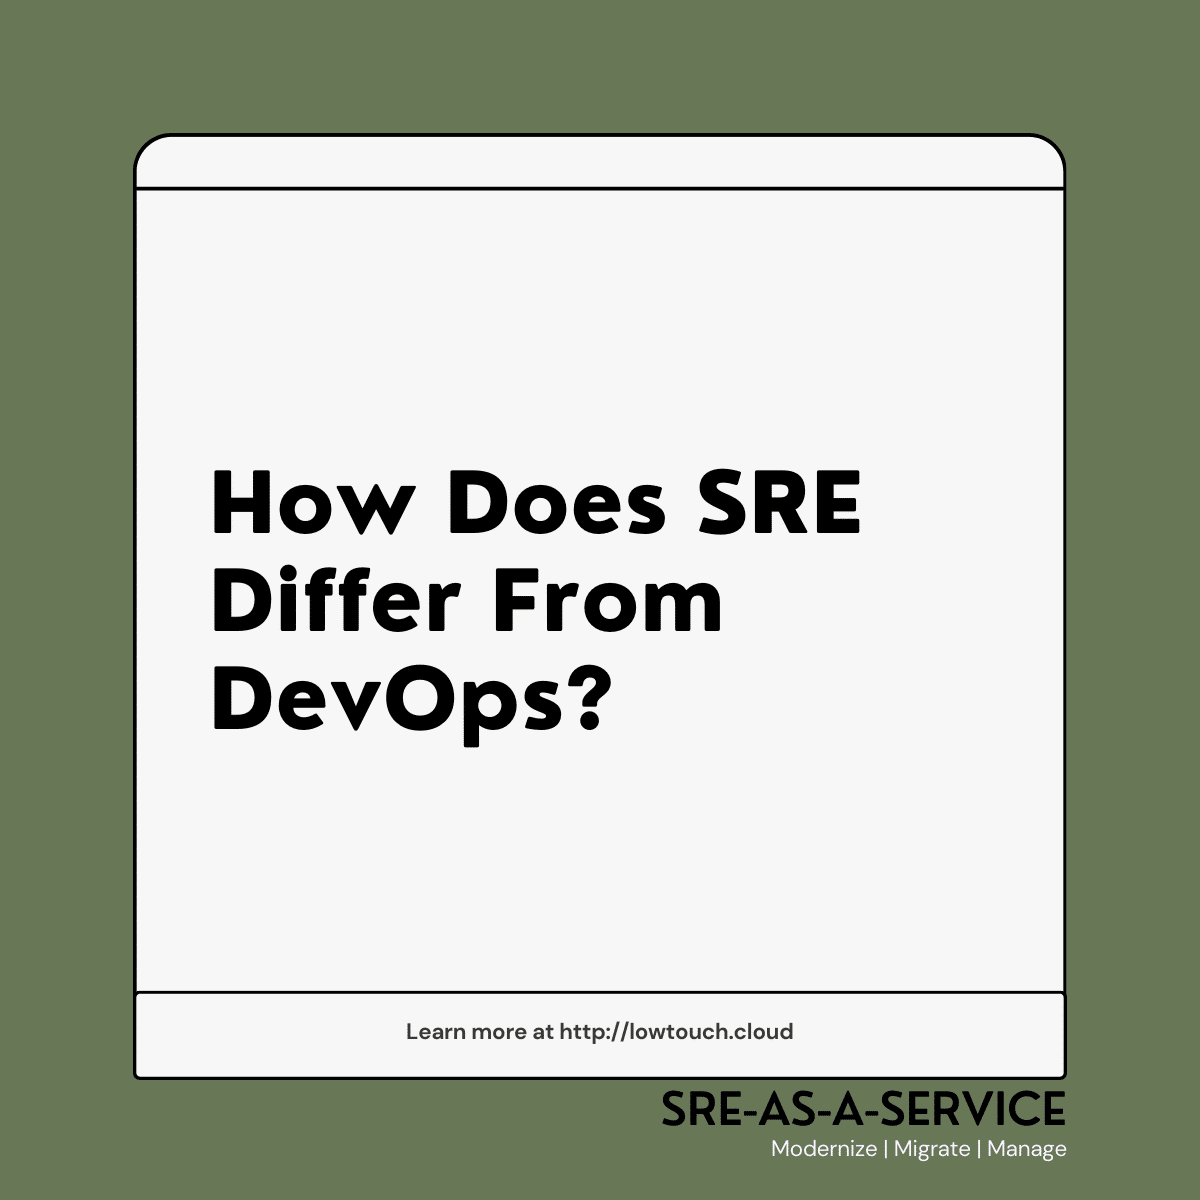 How Does SRE differ from DevOps?